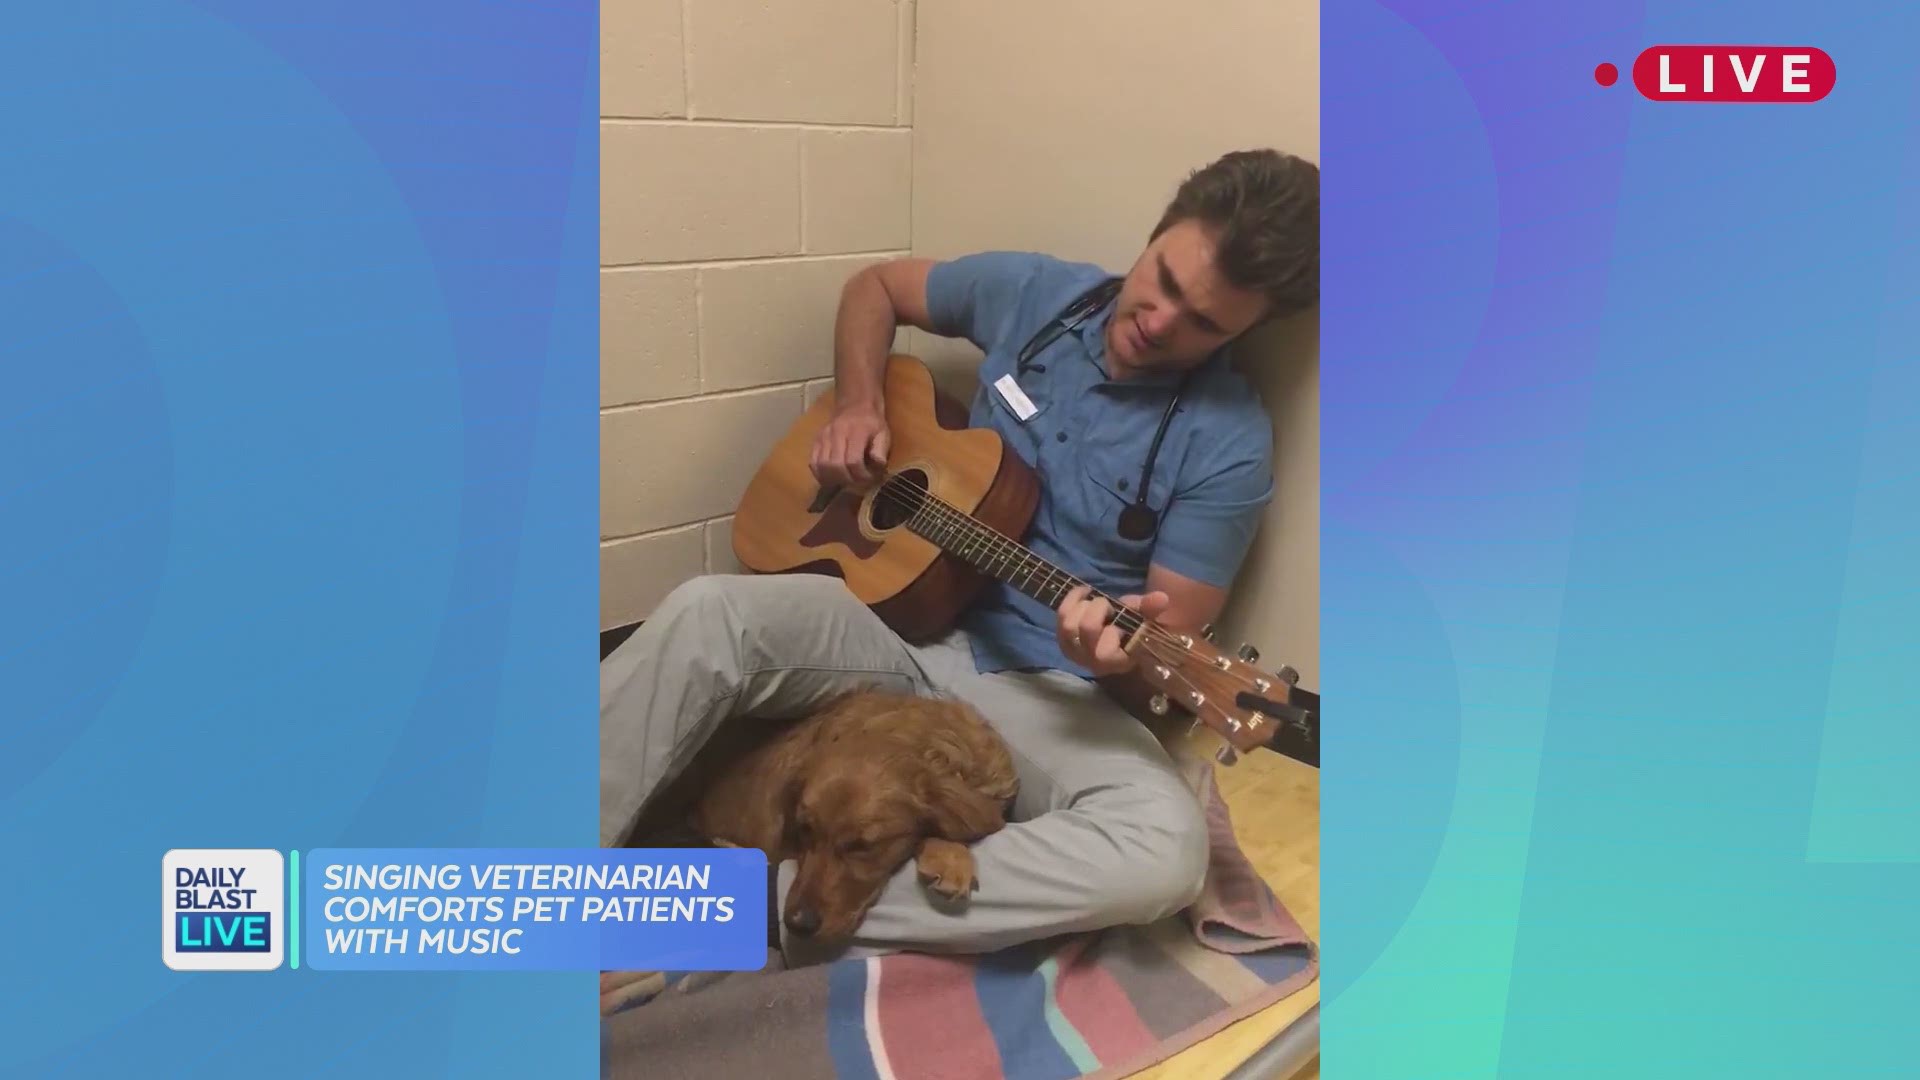 Doctor Ross Henderson is a veterinarian whose voice soothes all species! This vet has gone viral for his adorable videos that show Henderson cuddling and serenading animals before going under for surgery. His videos have melted the nation's hearts and Dai